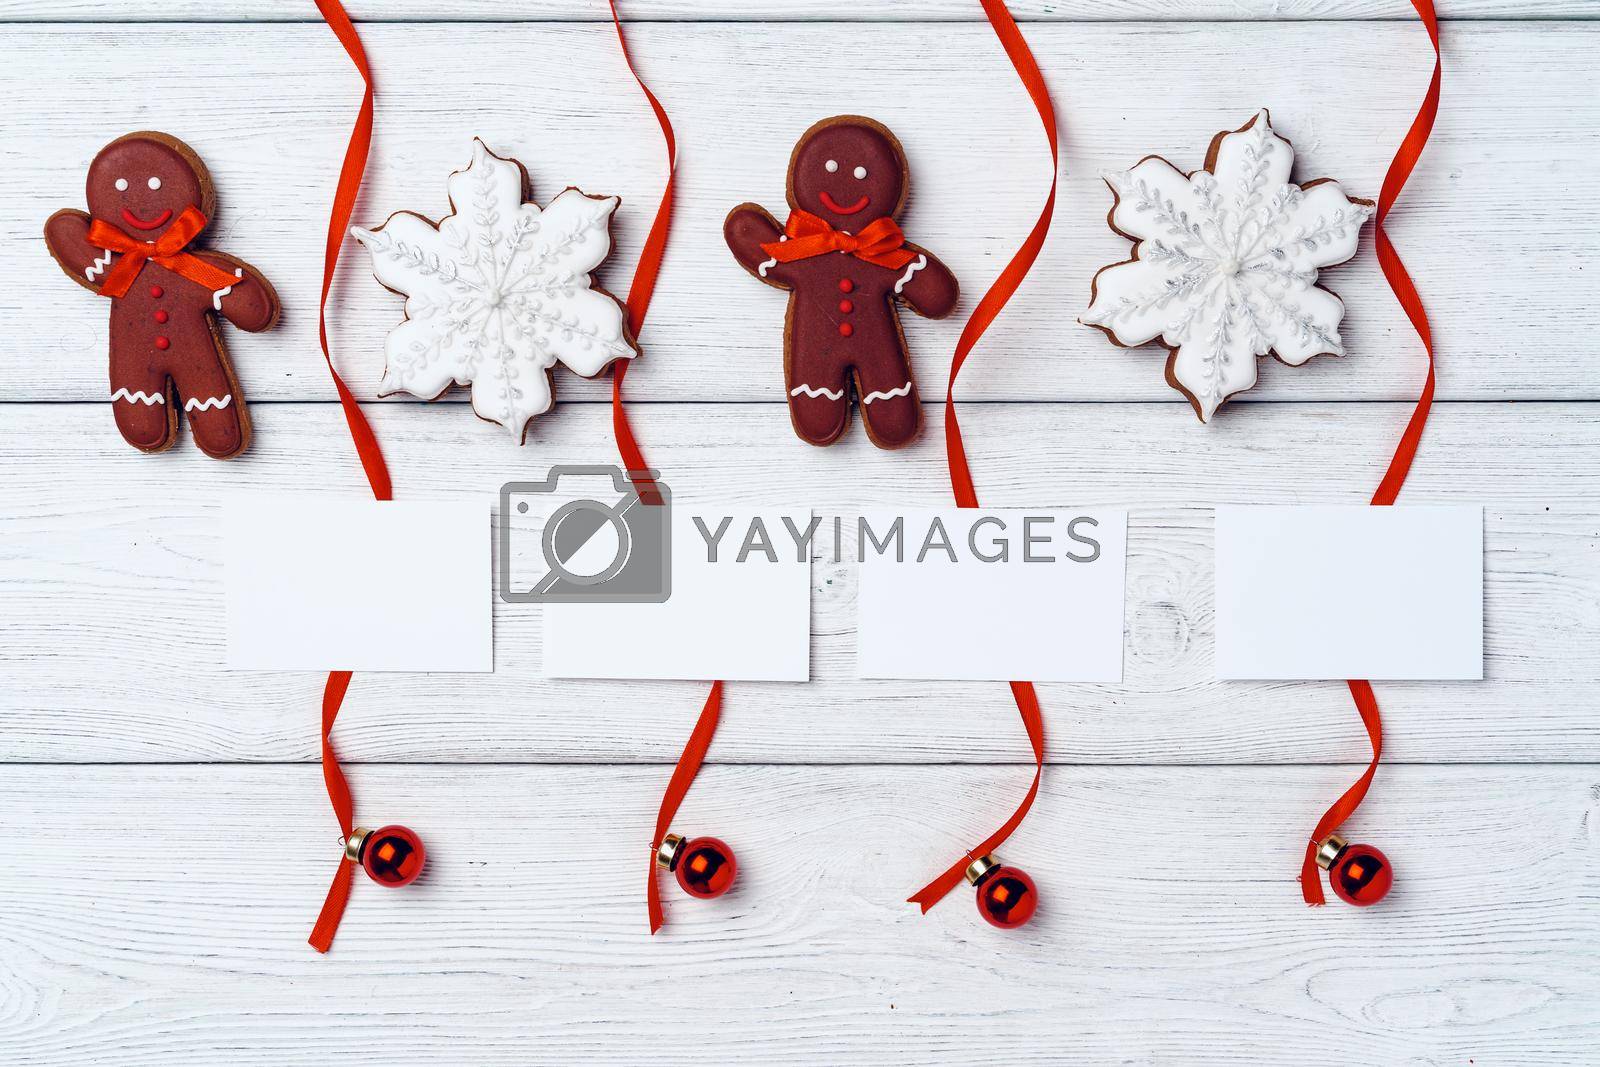 Royalty free image of New year greeting background with red ribbons and baubles by Fabrikasimf